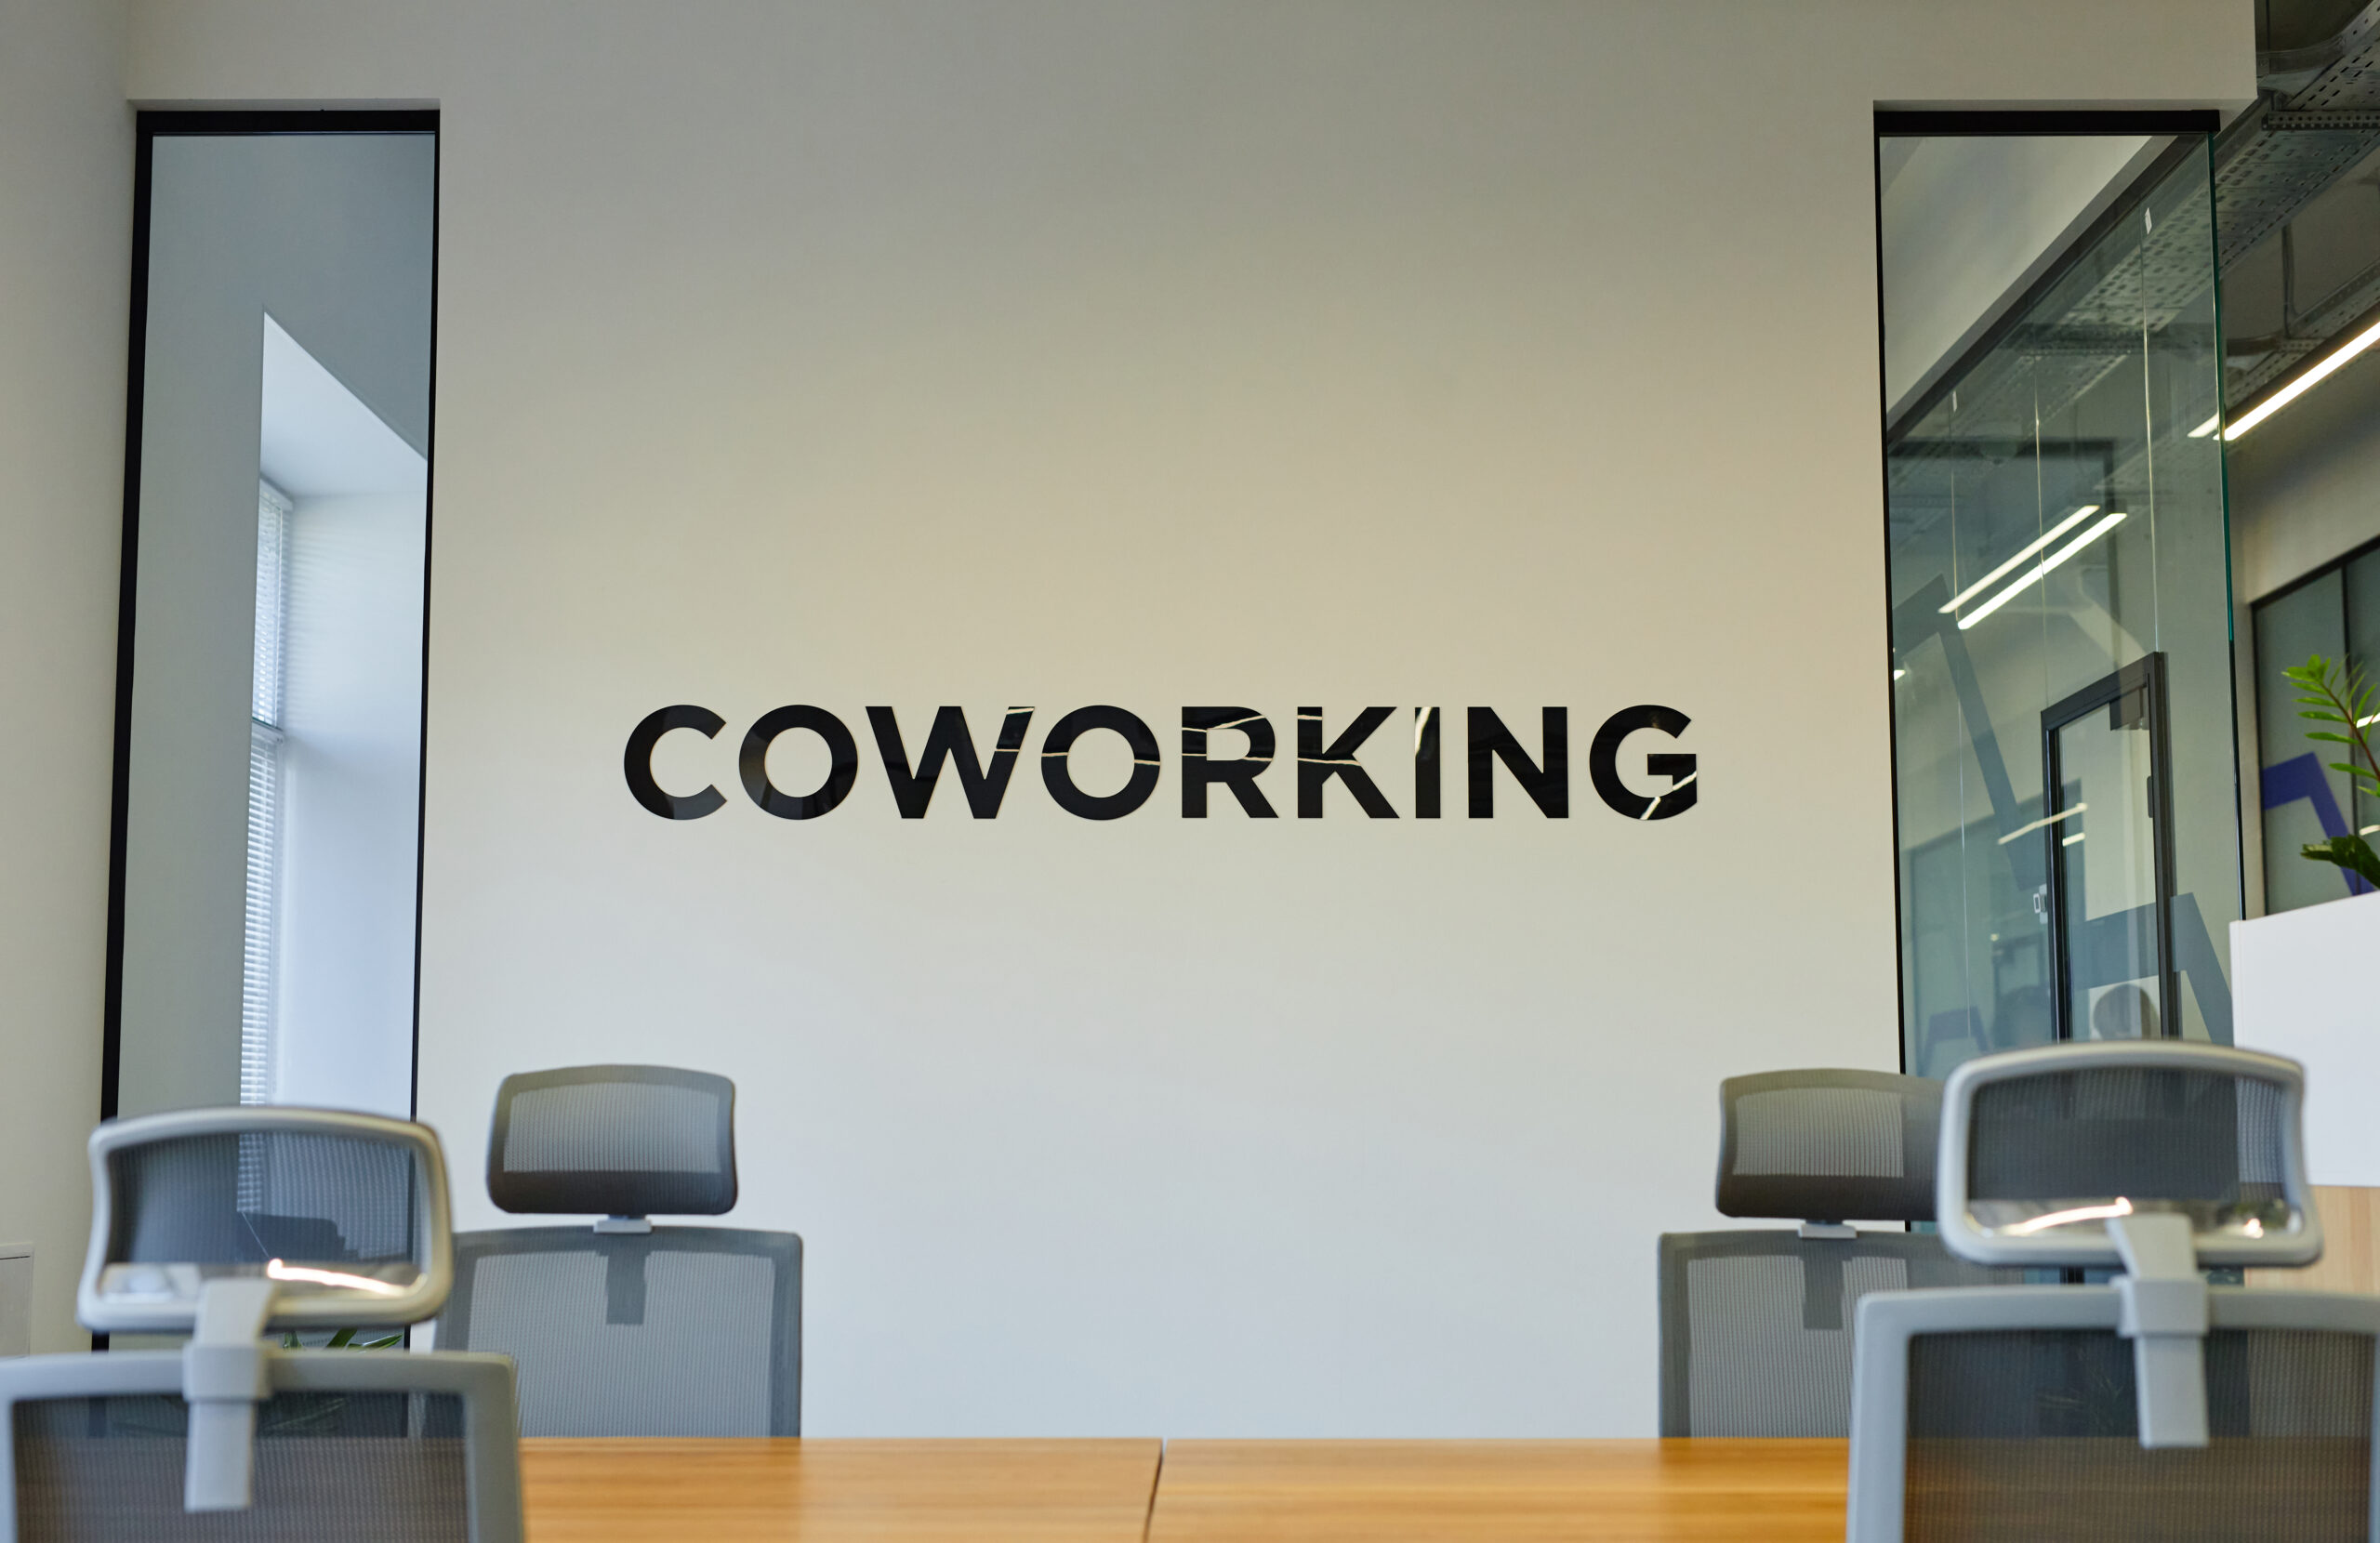 Coworking Custom Signs Made By Artisan Signworks in Frisco, TX